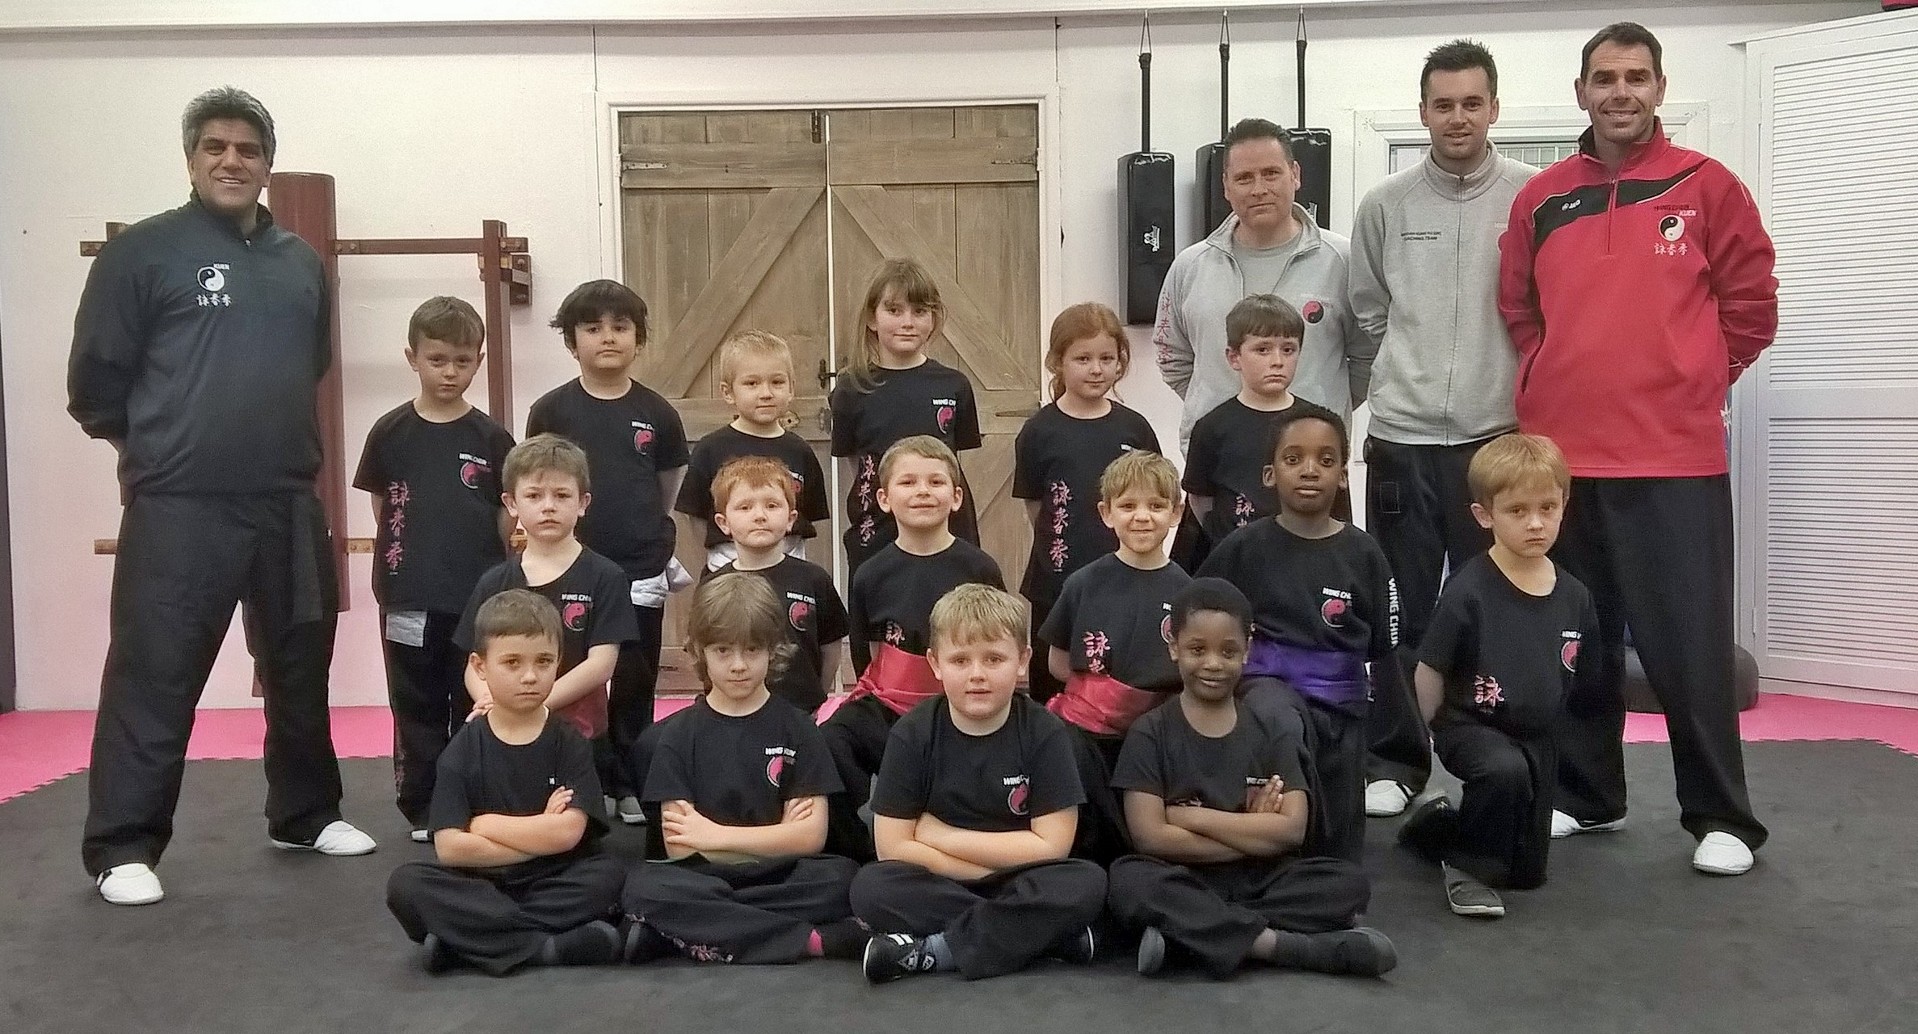 Just one of our terrific groups, we teach over 1000 children per week in a professional, motivational way with high Instructor to student ratio.